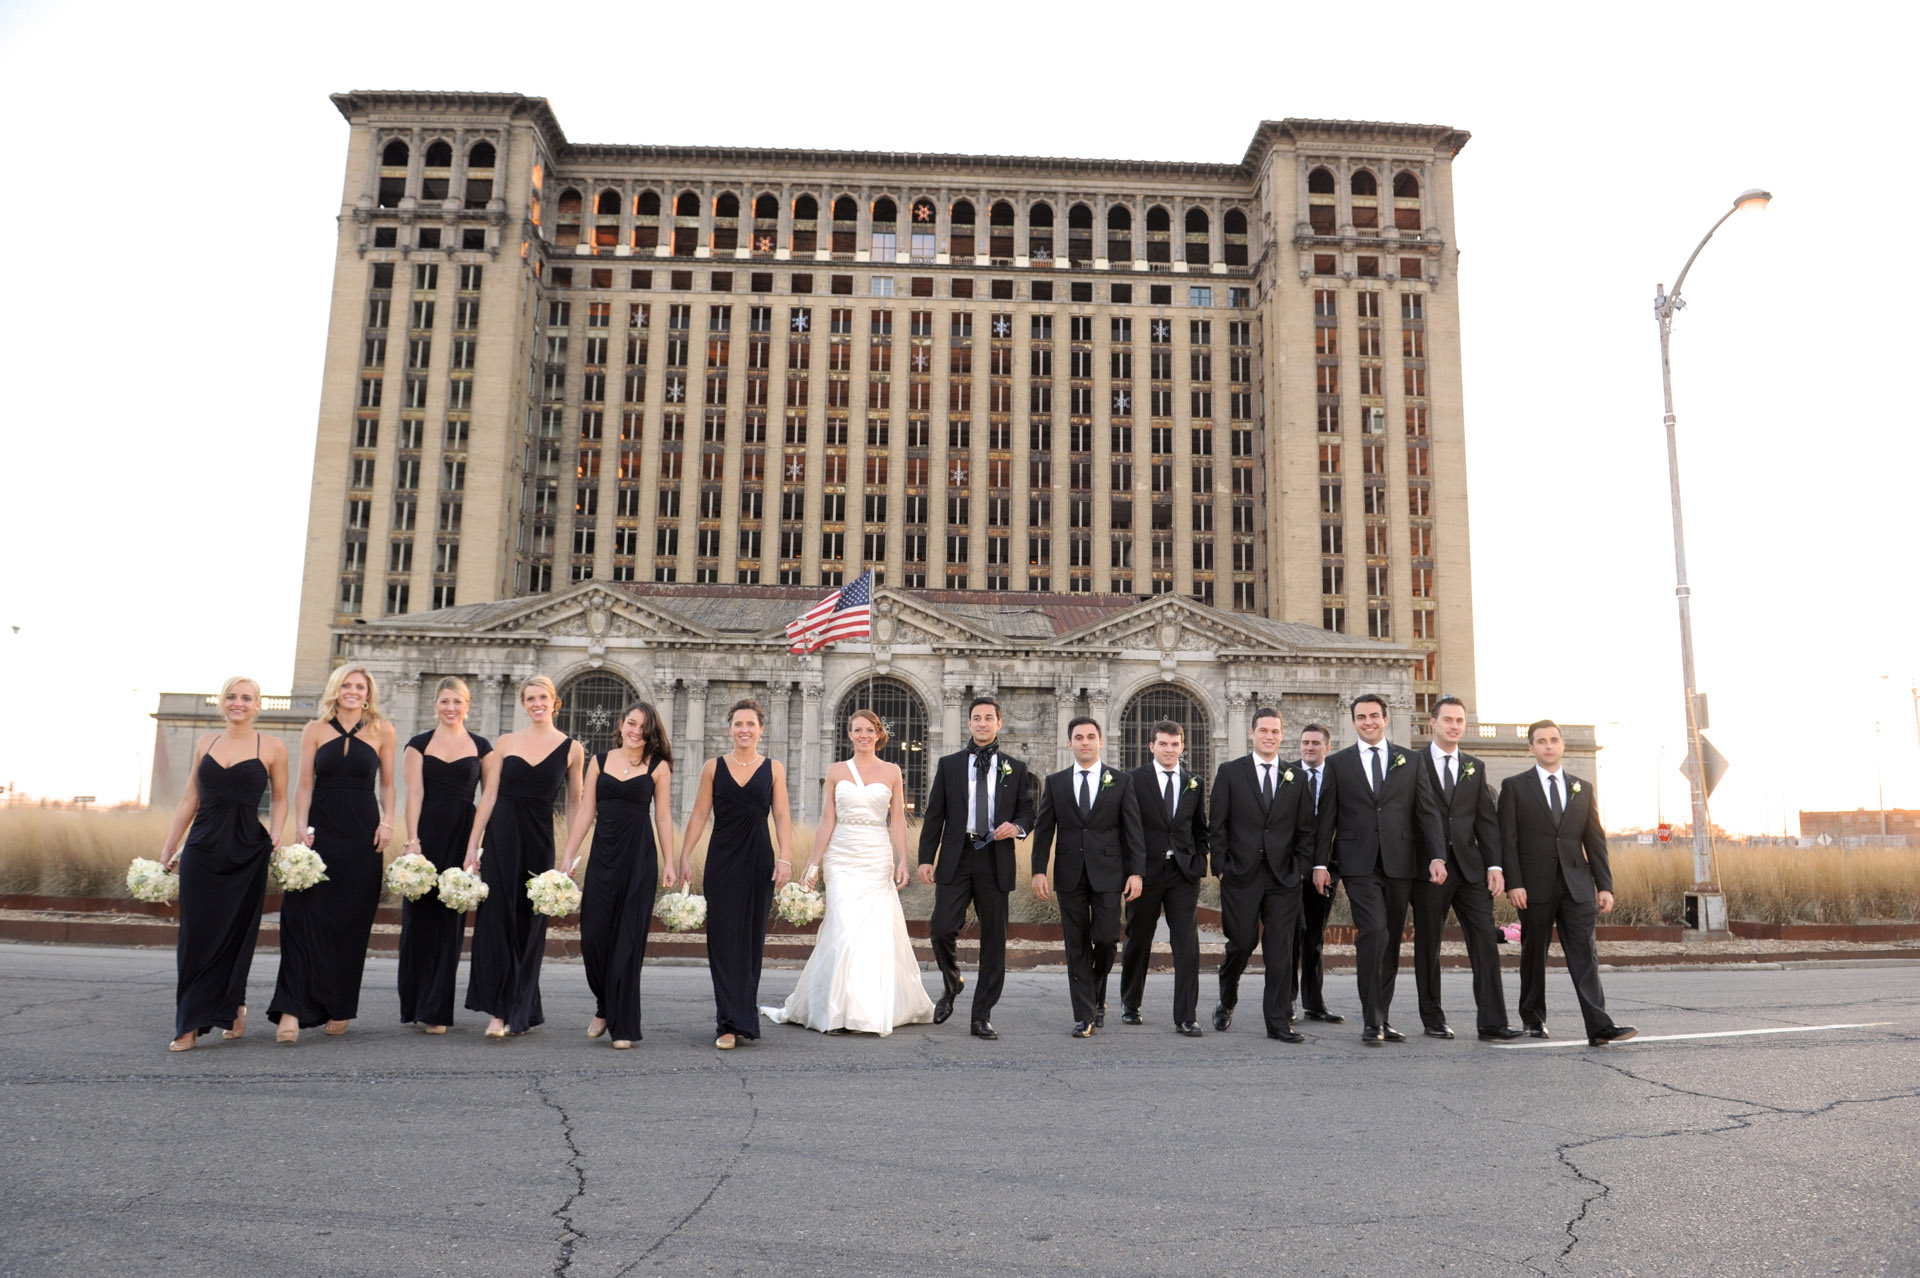 The Historic church Sweetest Heart of Mary and the Dearborn Inn of Detroit's historic church in Detroit and Dearborn, Michigan wedding photographer's photo of the photo of the wedding party at Detroit's historic train station for wedding photos in Detroit, Michigan.